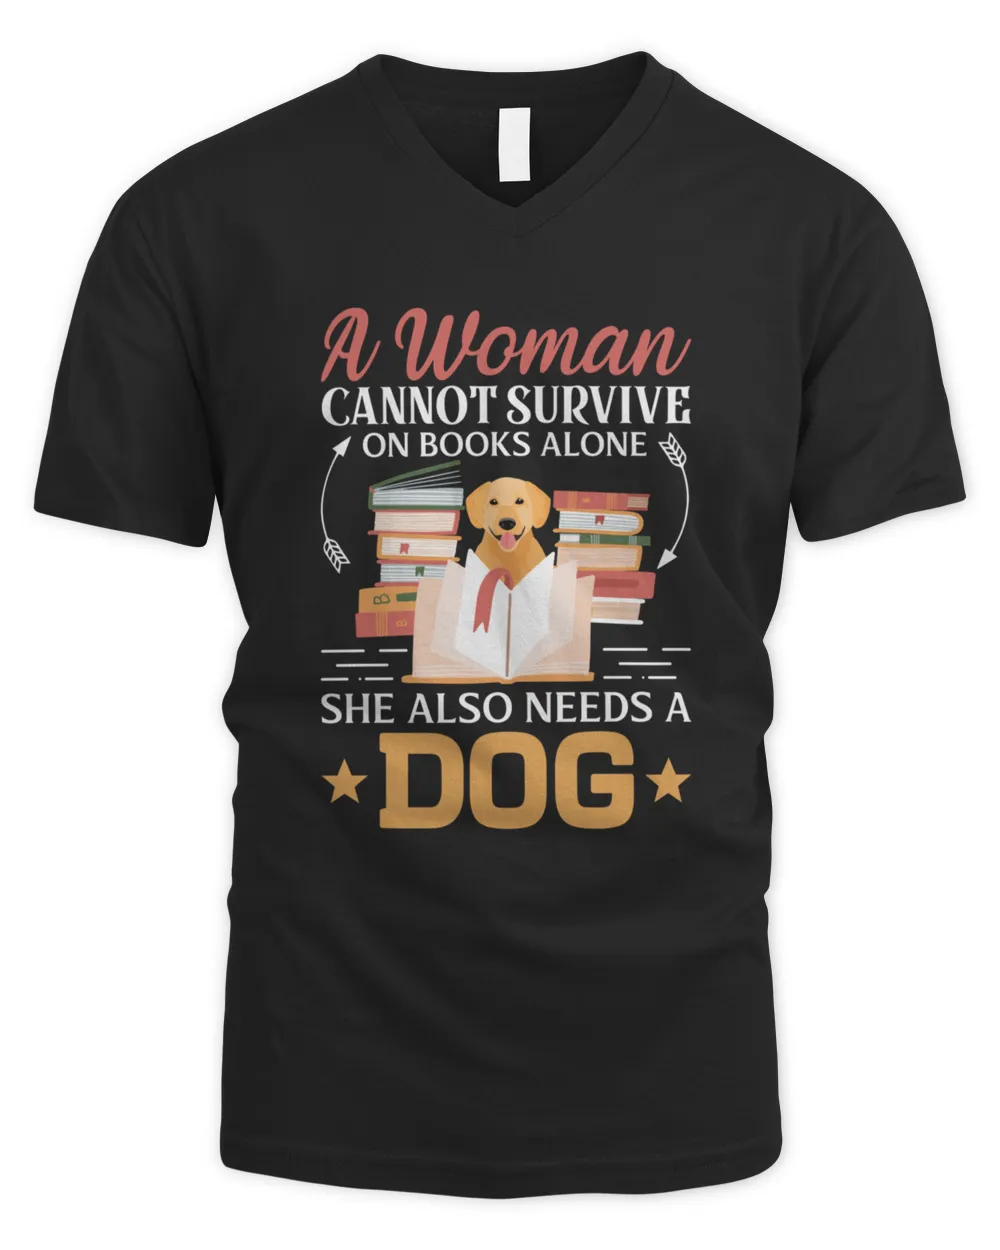 A Woman Cannot Survive On Books Alone She Also Needs A Dog Shirt9252 T-Shirt